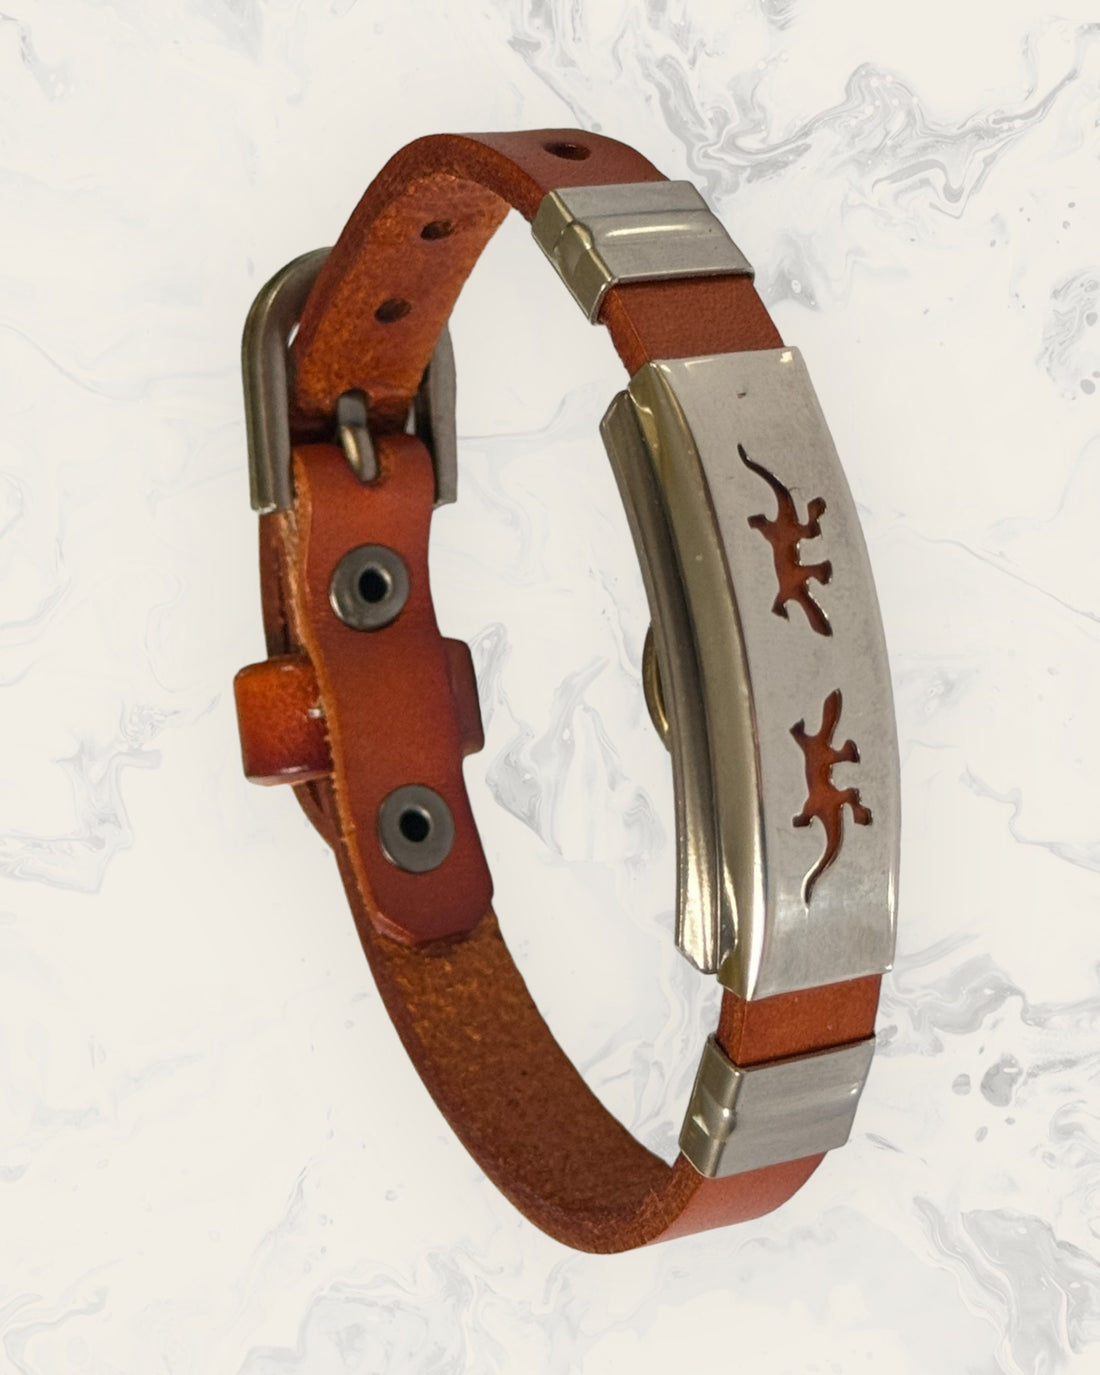 Natural Pain Relief and EMF Protection Bracelet Leather Band Color Burnt Orange with Two Geckos design on a silver metal slider